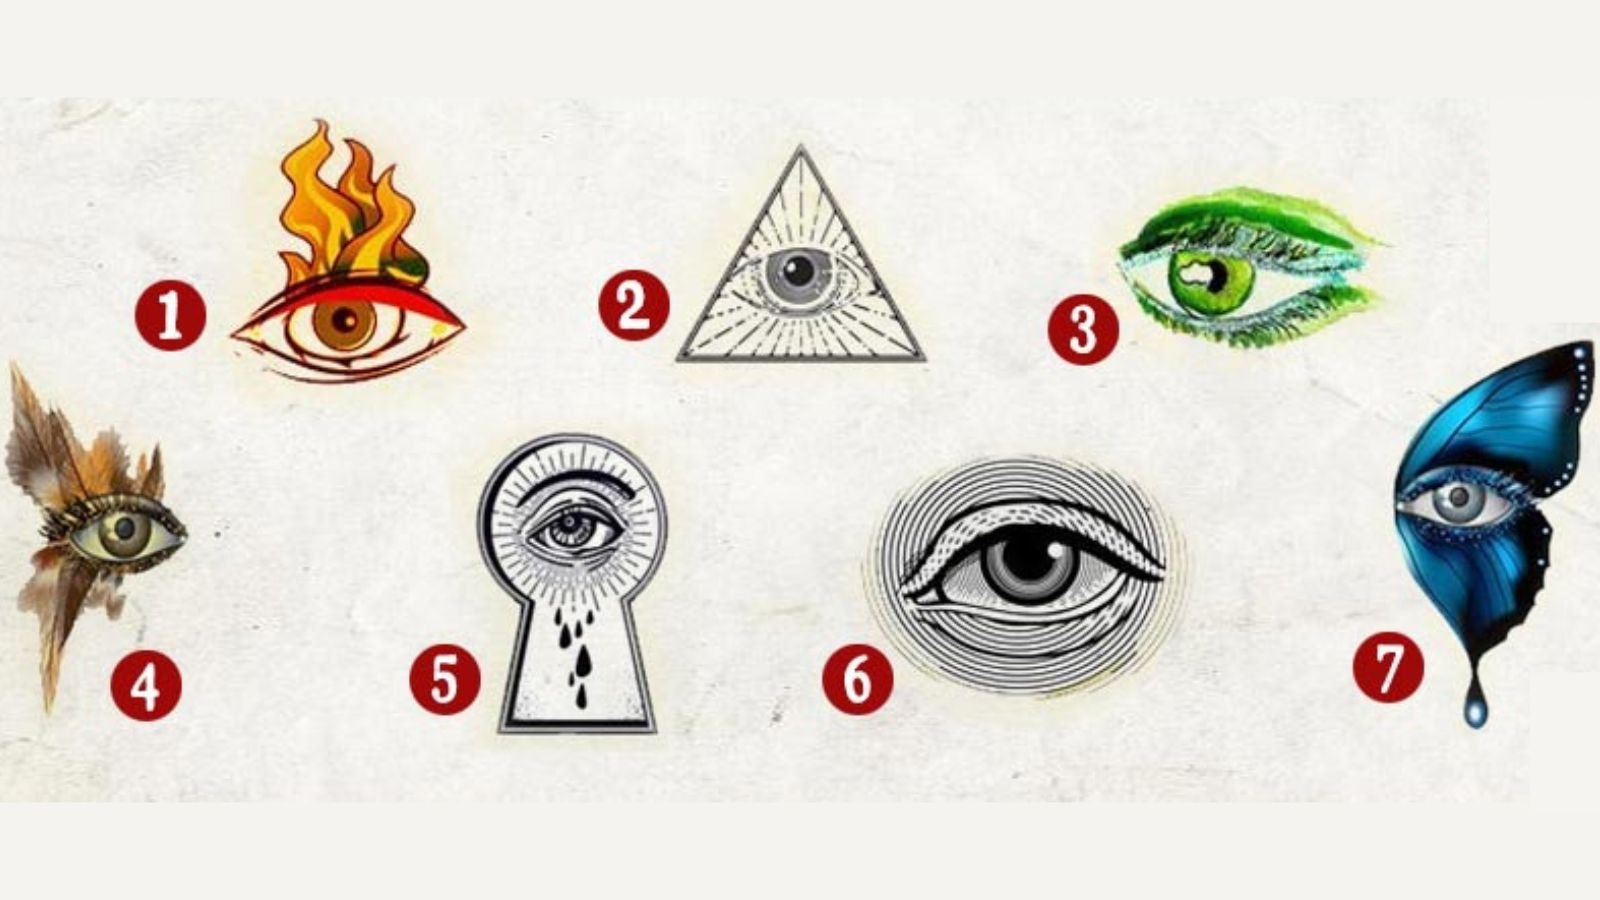 Quiz: The eyes you choose say something special about you